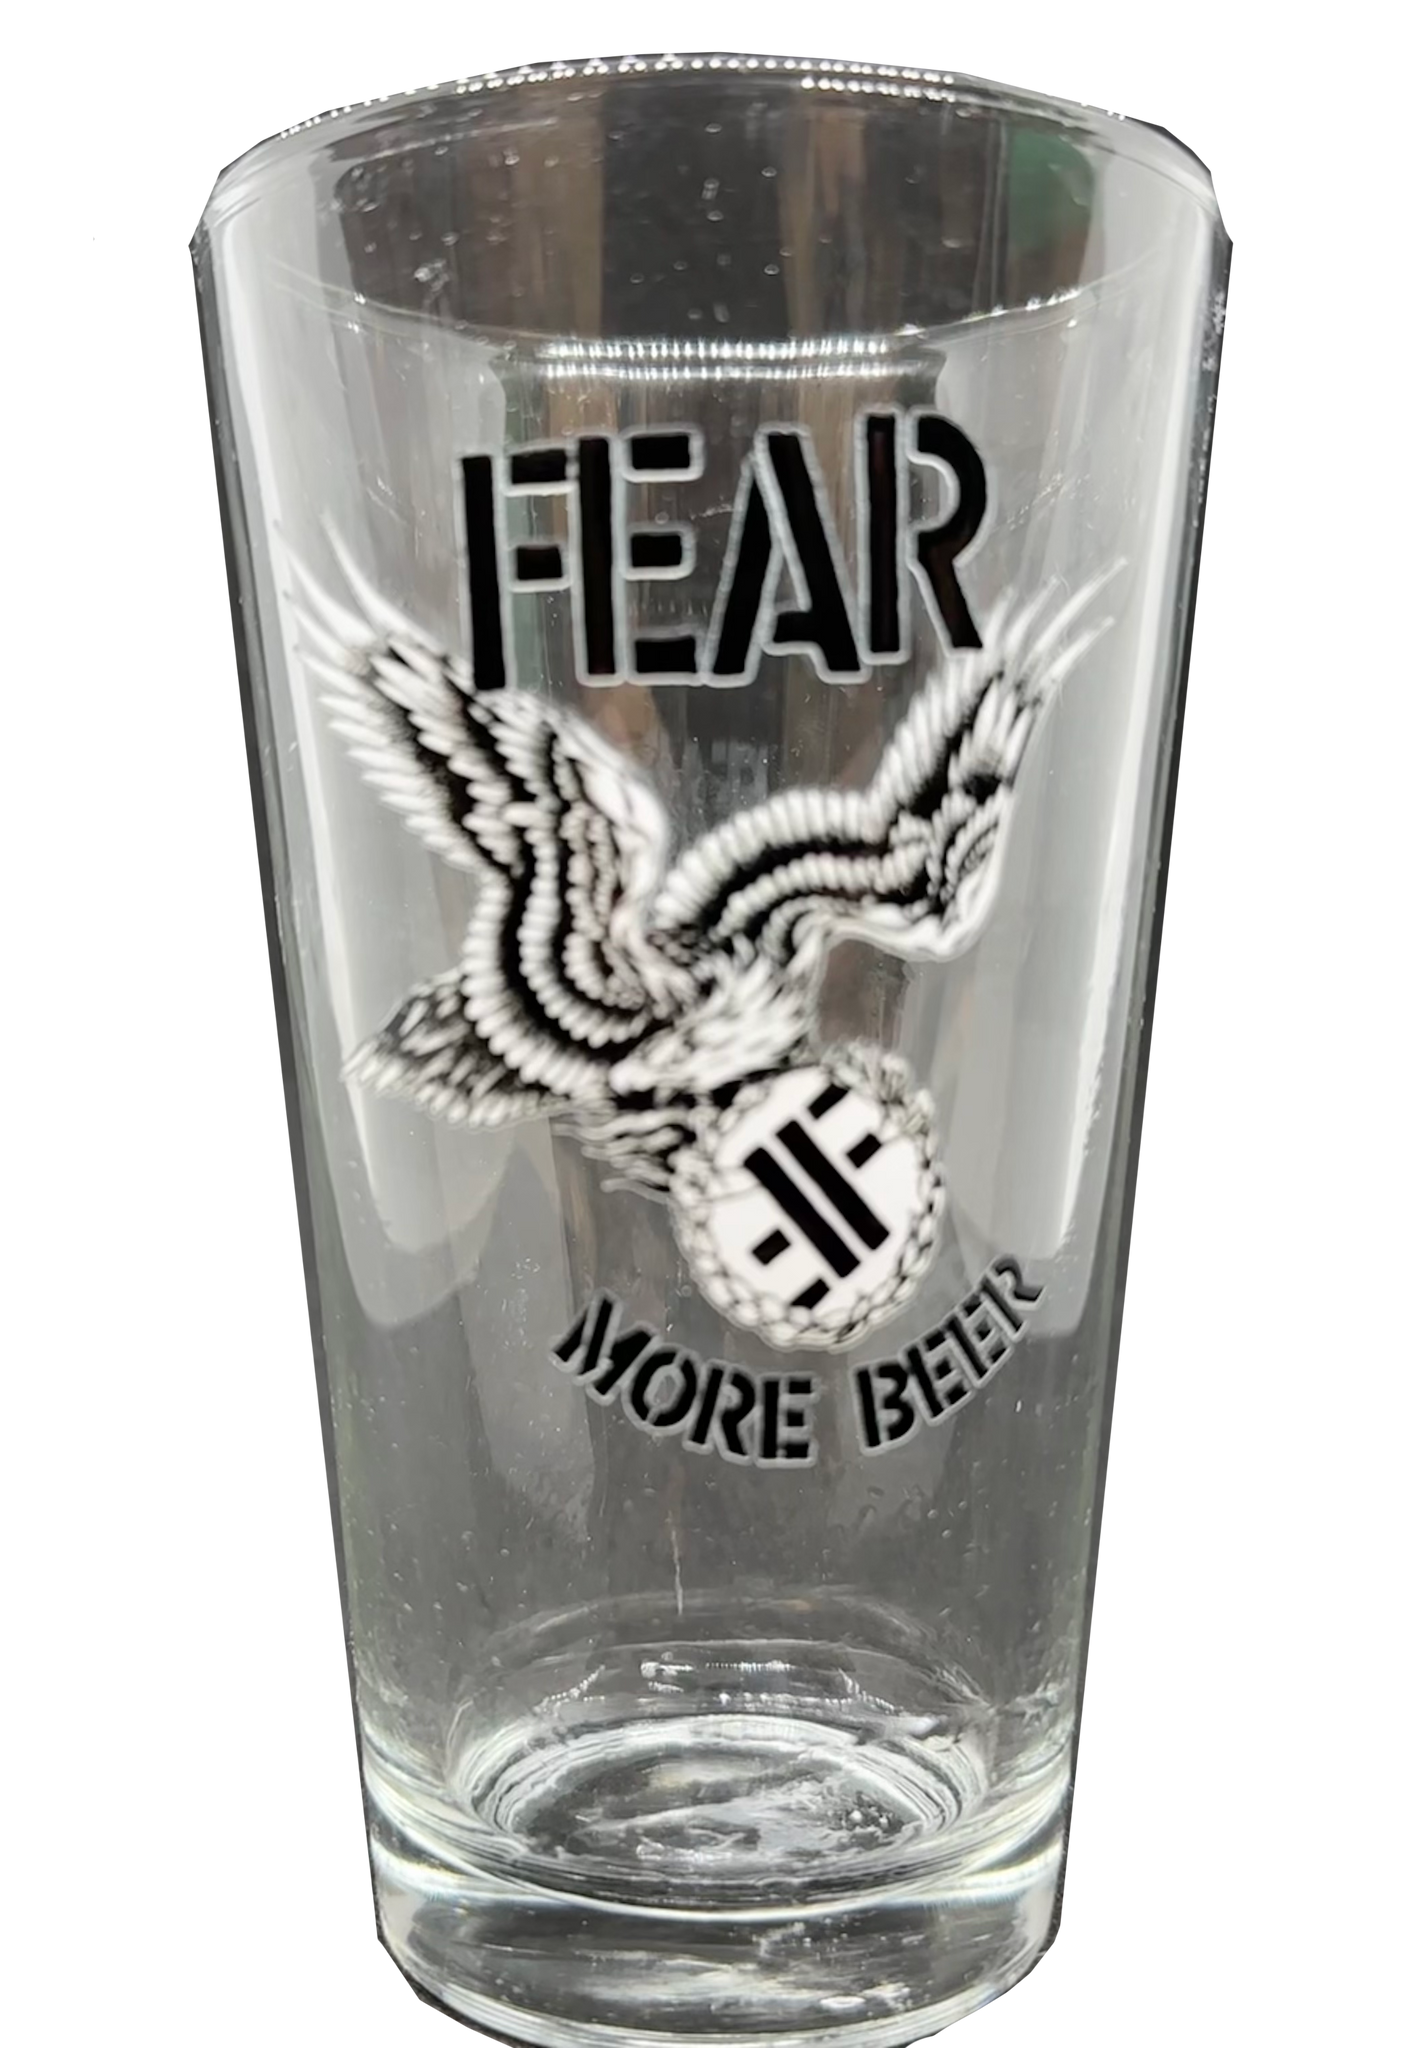 FEAR "MORE BEER" PINT GLASS